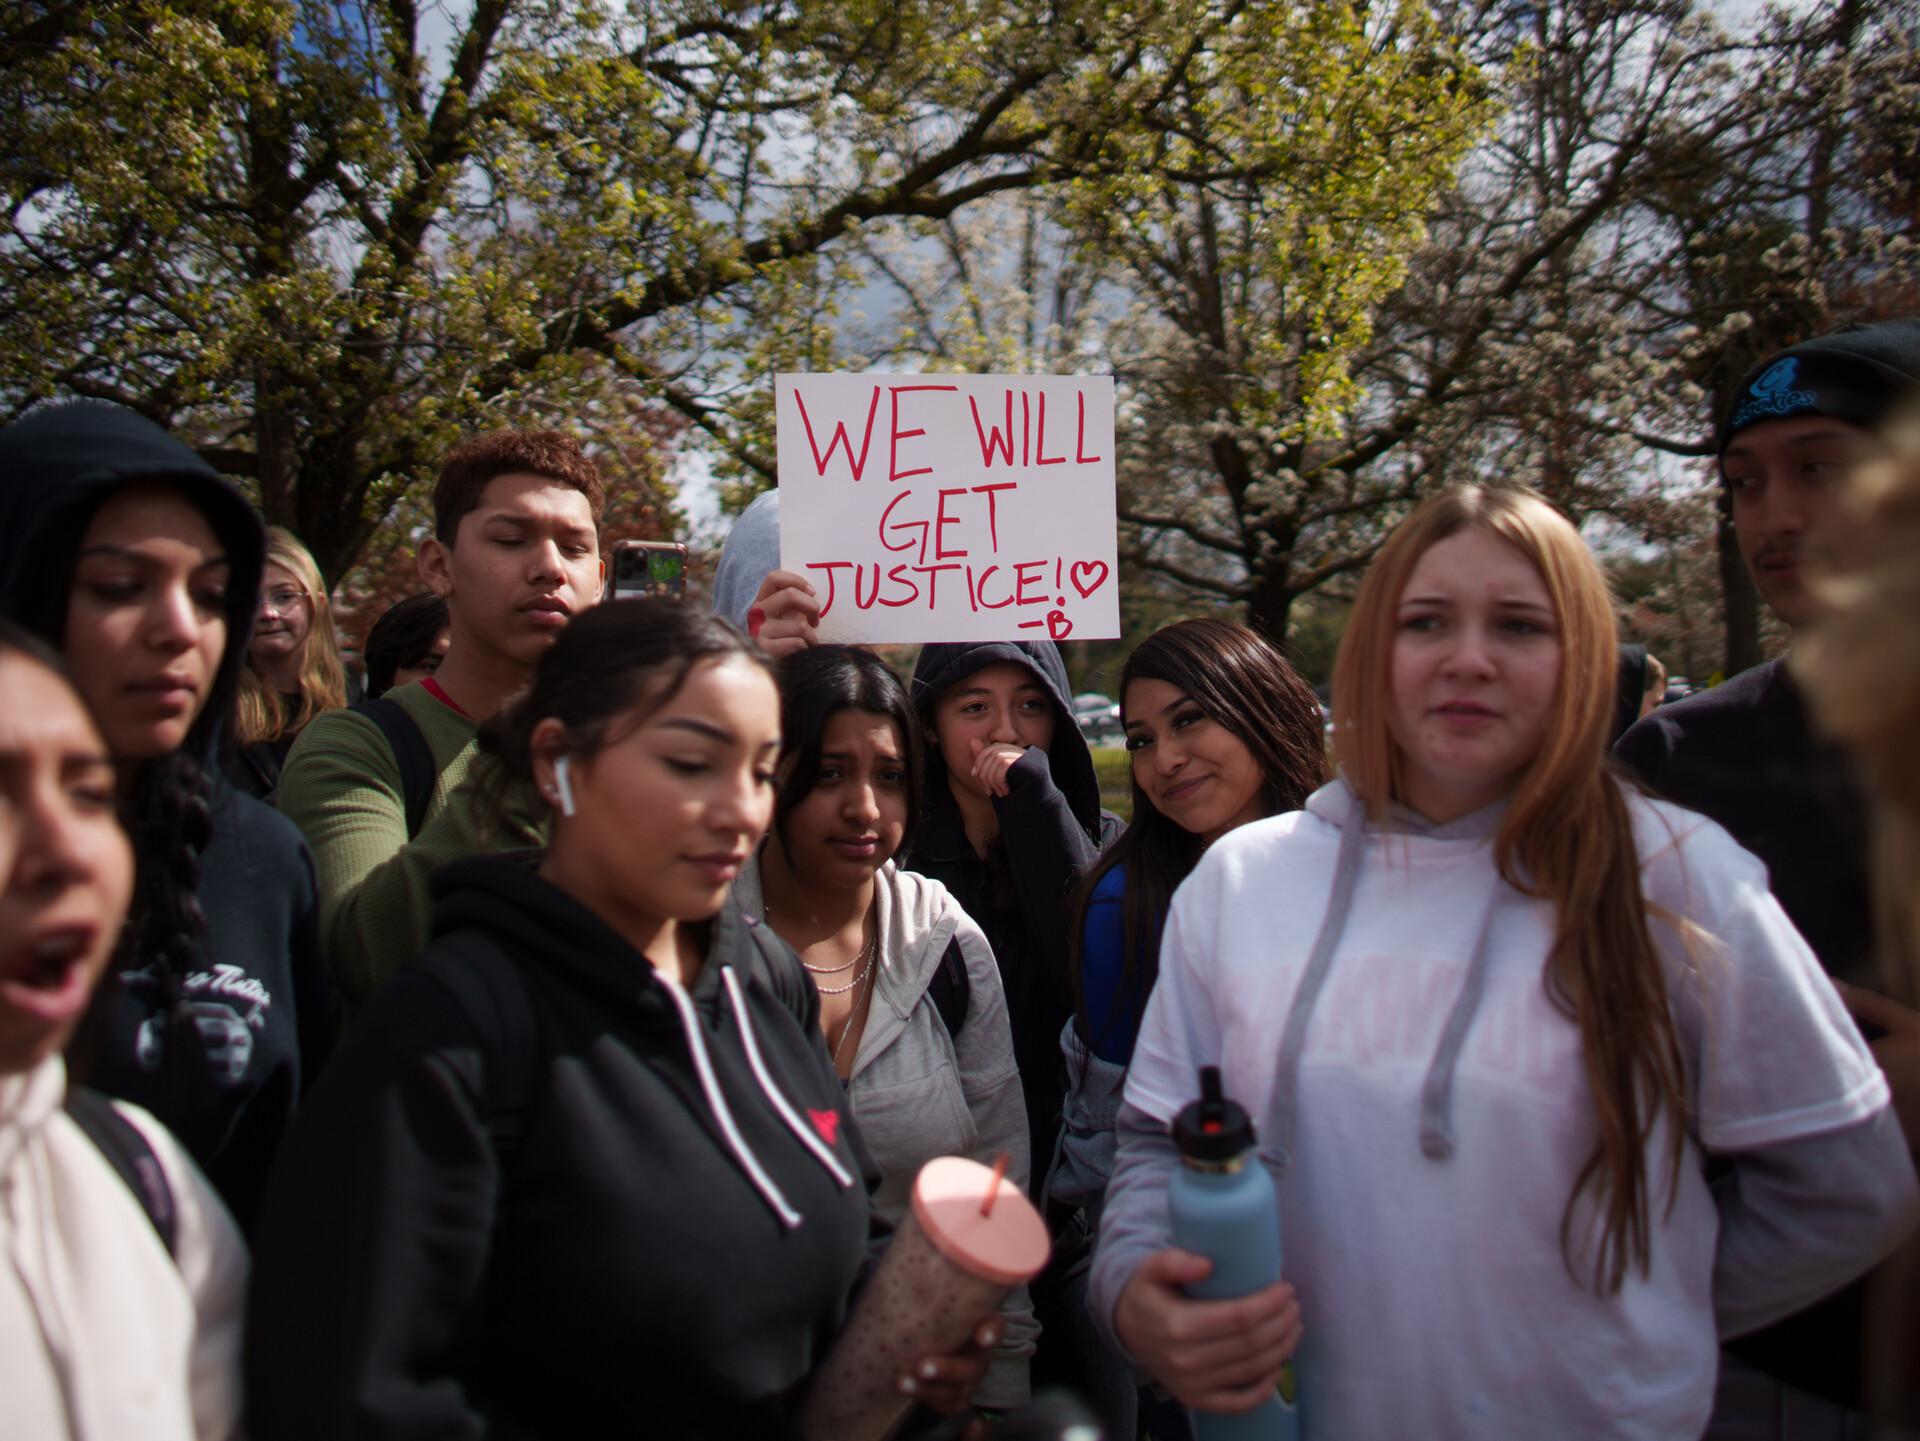 A group of students who appear to be high school aged stand together outside with trees in the background and one visible sign on white paper with red ink, reading 'we will get jutice'